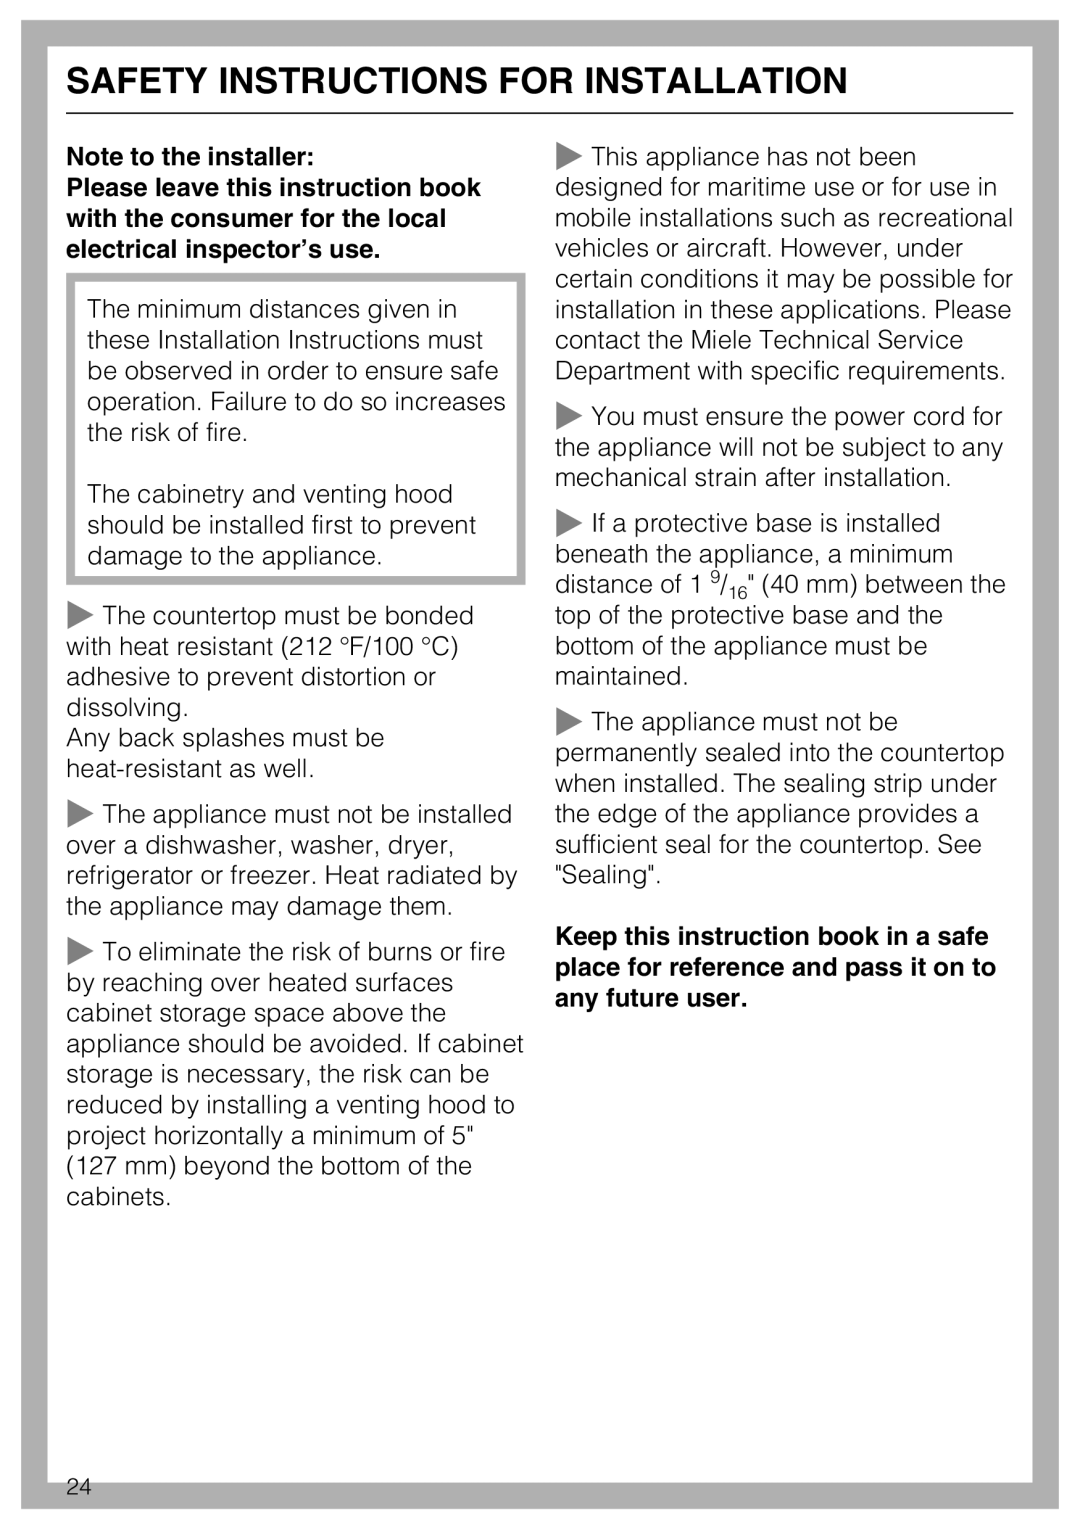 Miele CS 1223 installation instructions Safety Instructions For Installation 